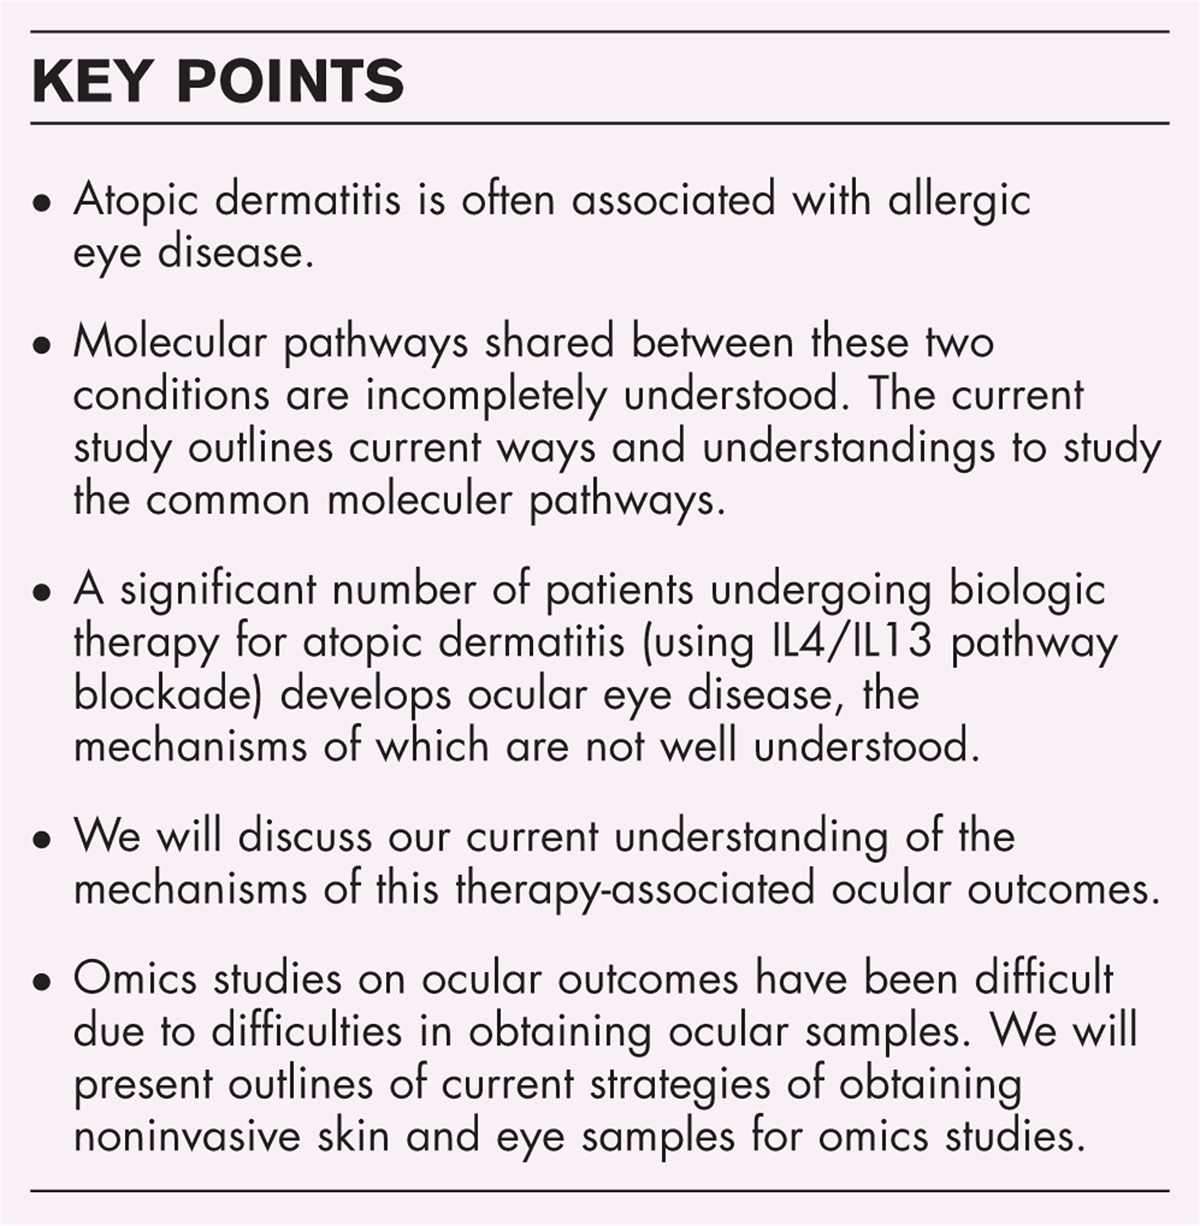 Atopic dermatitis and ocular allergy: common mechanisms and uncommon questions